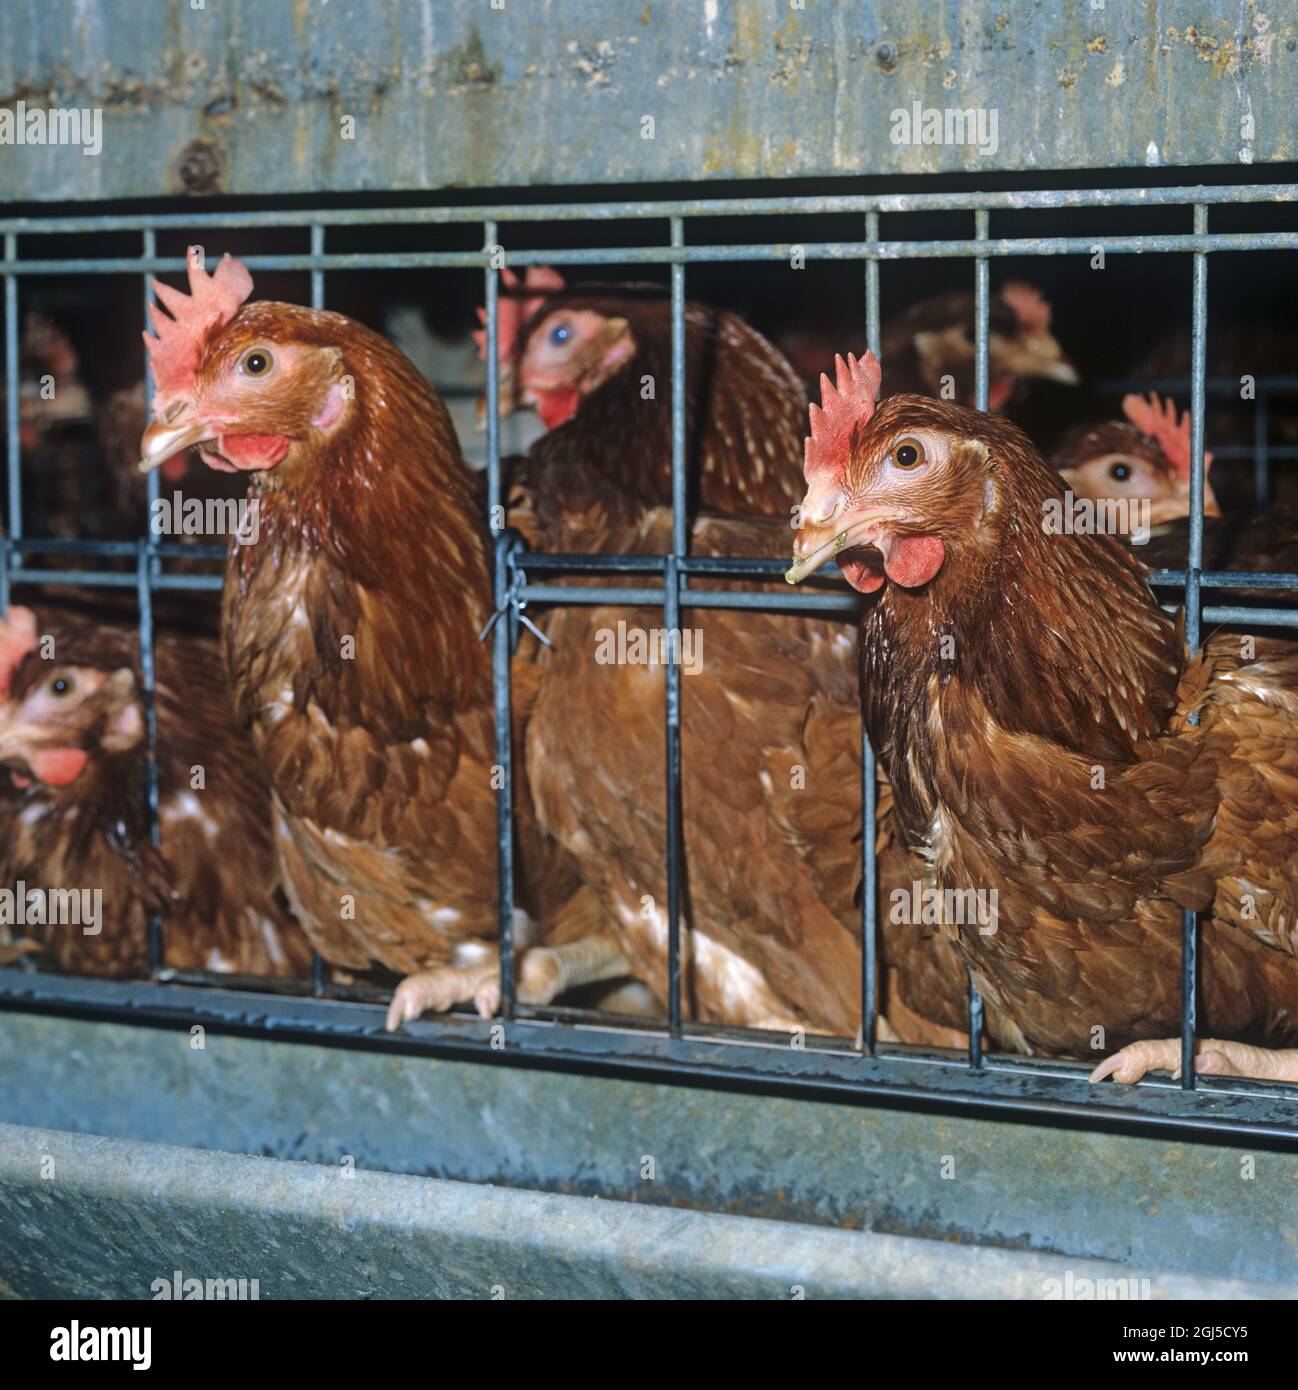 Battery hens (isa brown) egg laying chickens in confined cages with some feather loss, shows access to feeding trough Stock Photo